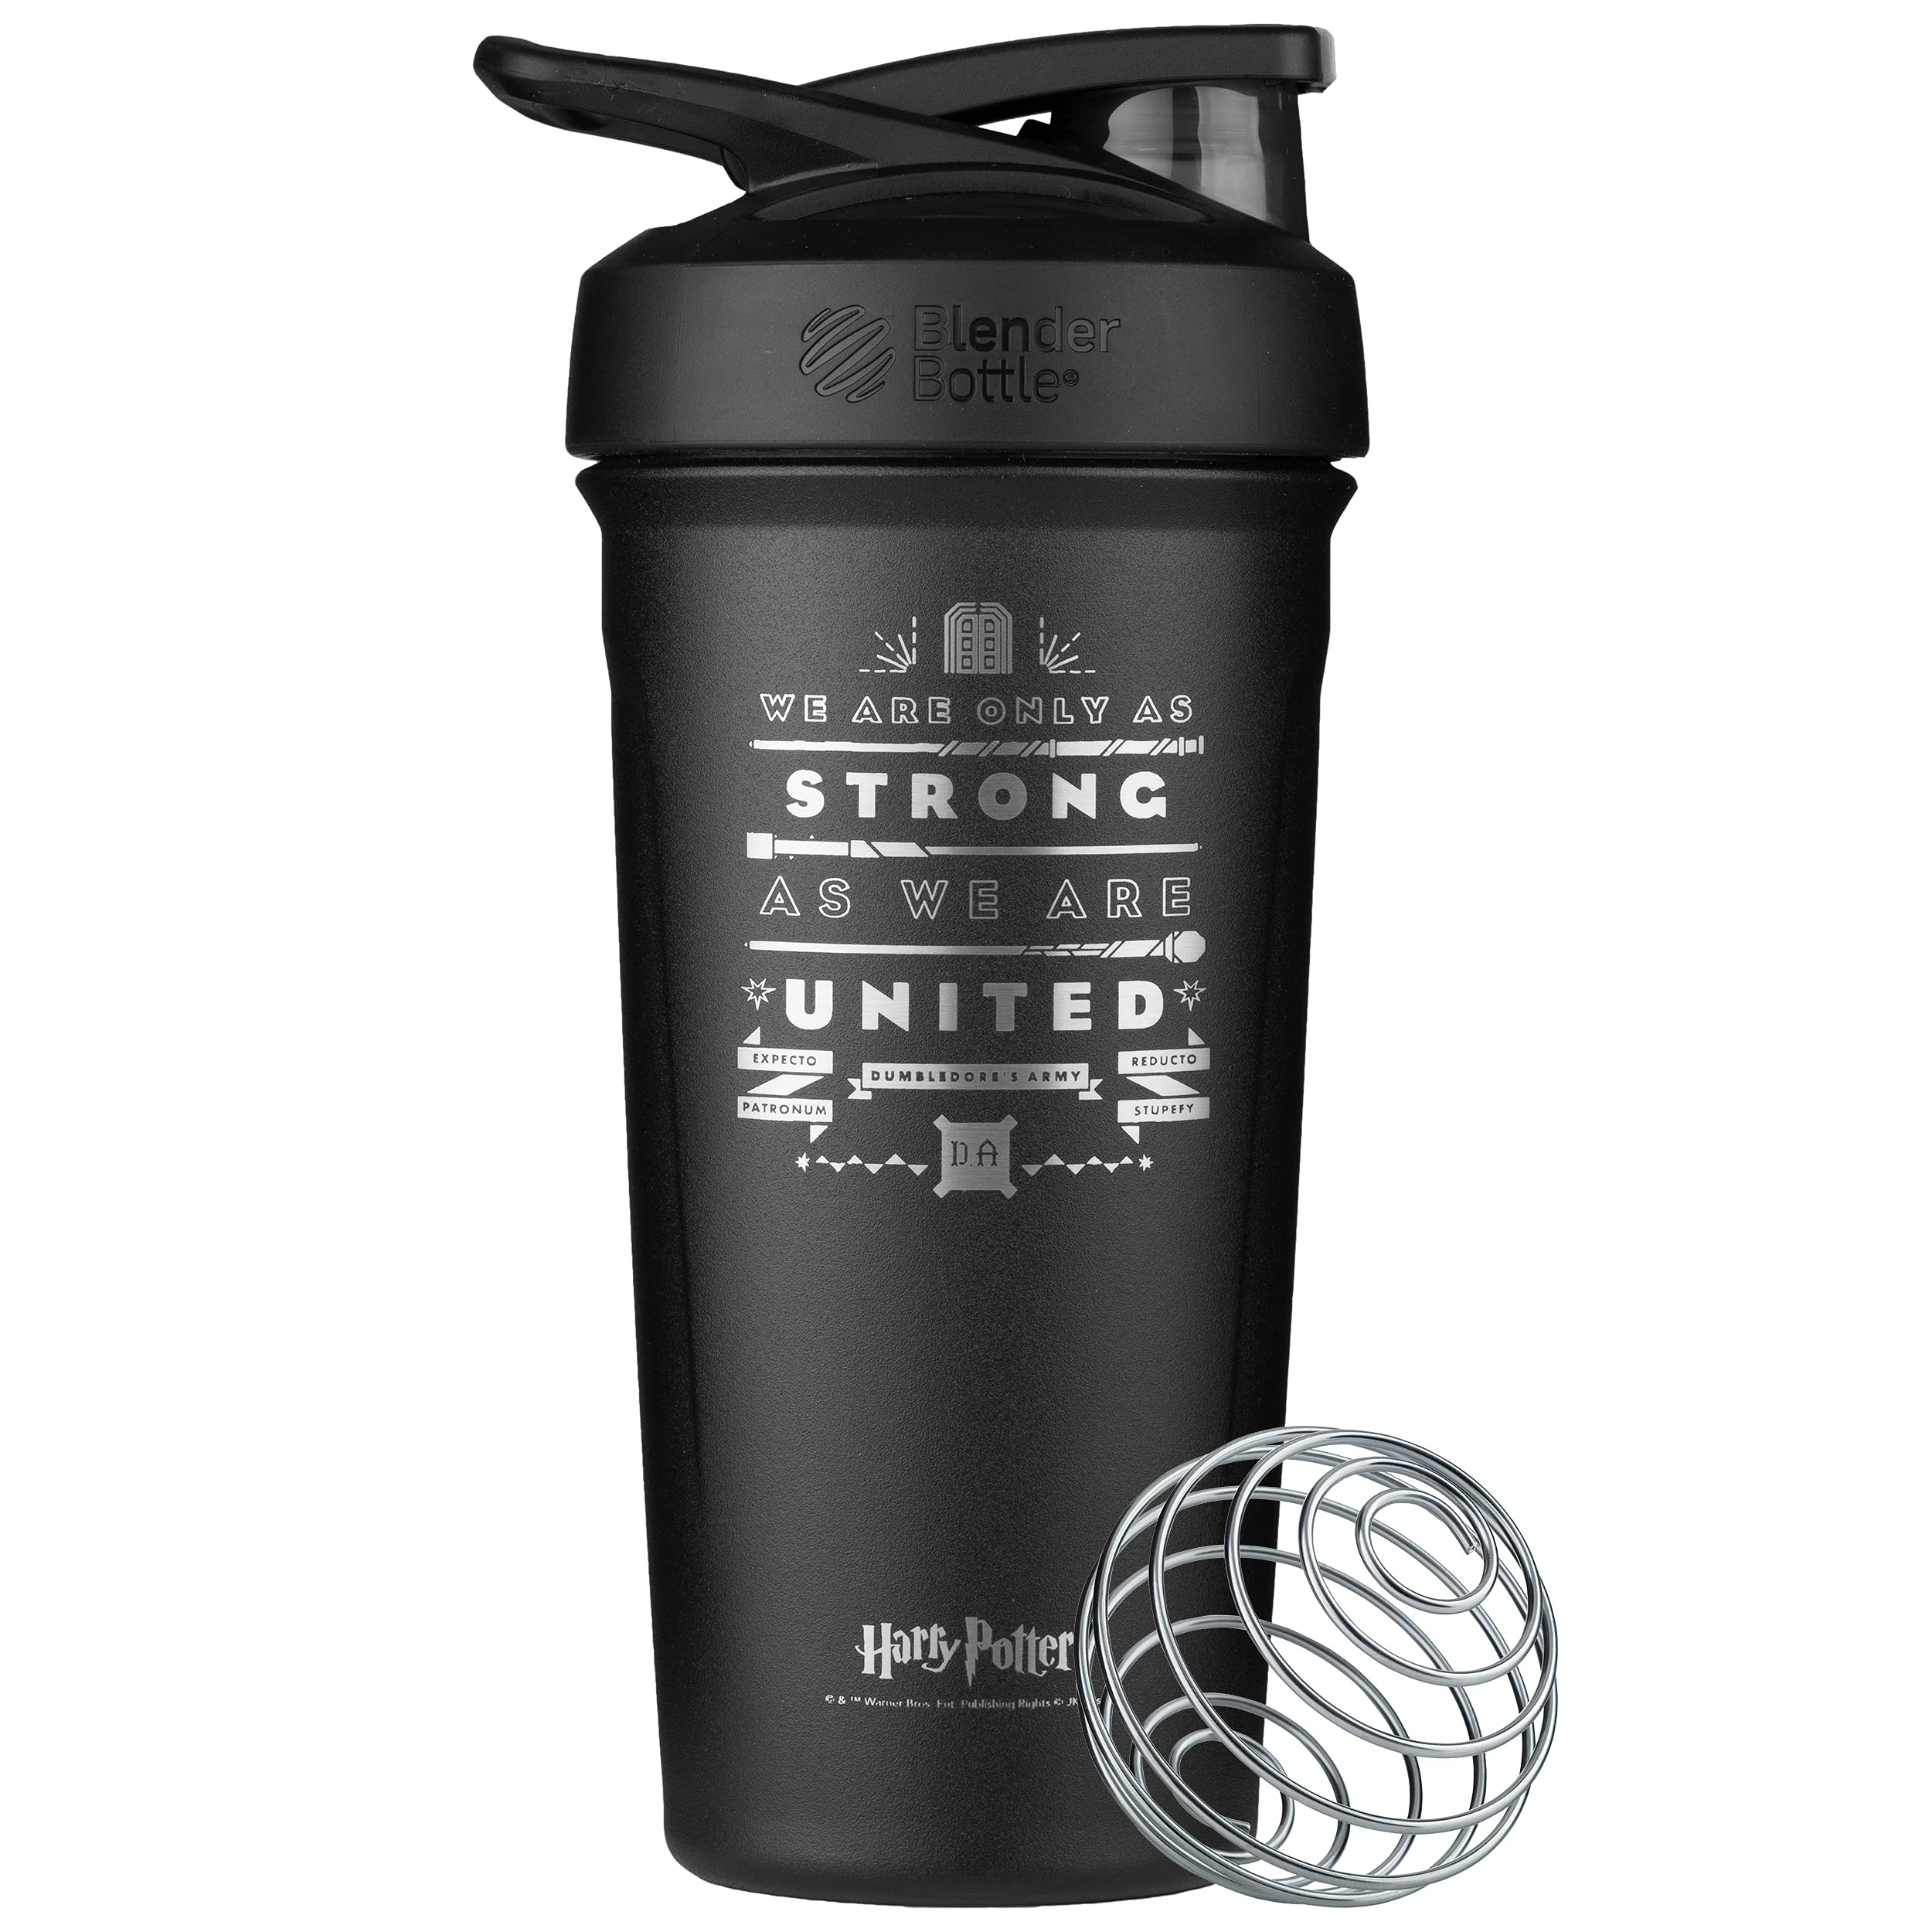 BlenderBottle Harry Potter Strada Shaker Cup Insulated Stainless Steel Water Bottle with Wire Whisk, 24-Ounce, Dumbledore's Army